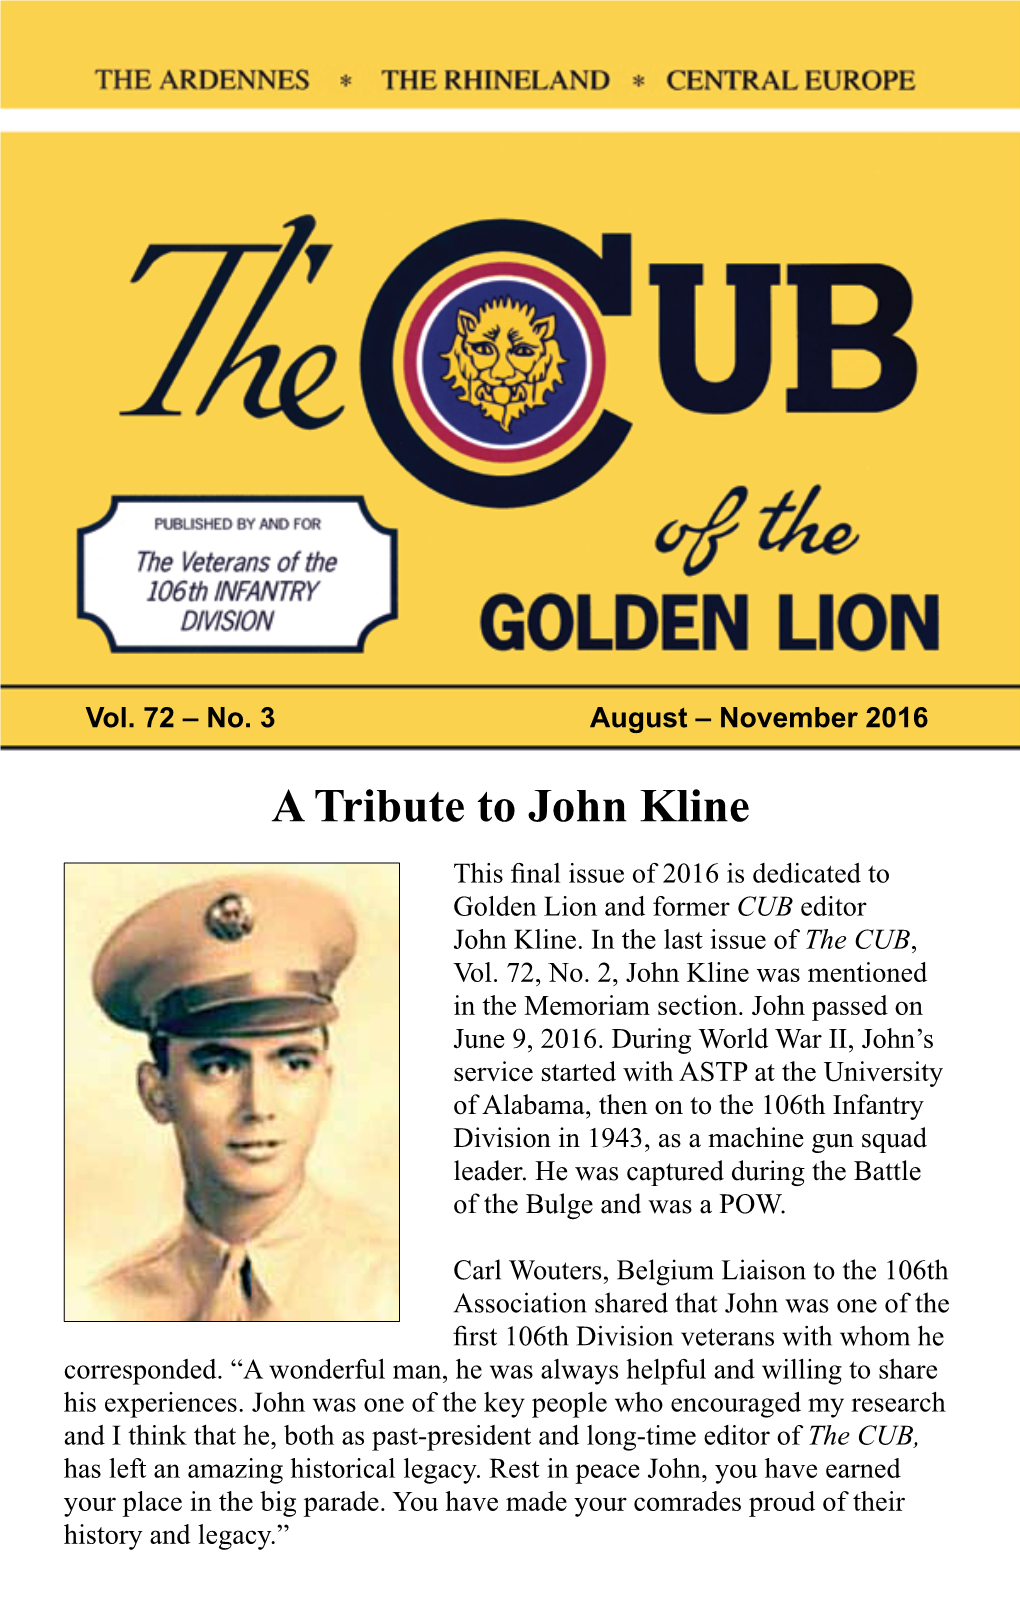 A Tribute to John Kline This Final Issue of 2016 Is Dedicated to Golden Lion and Former CUB Editor John Kline